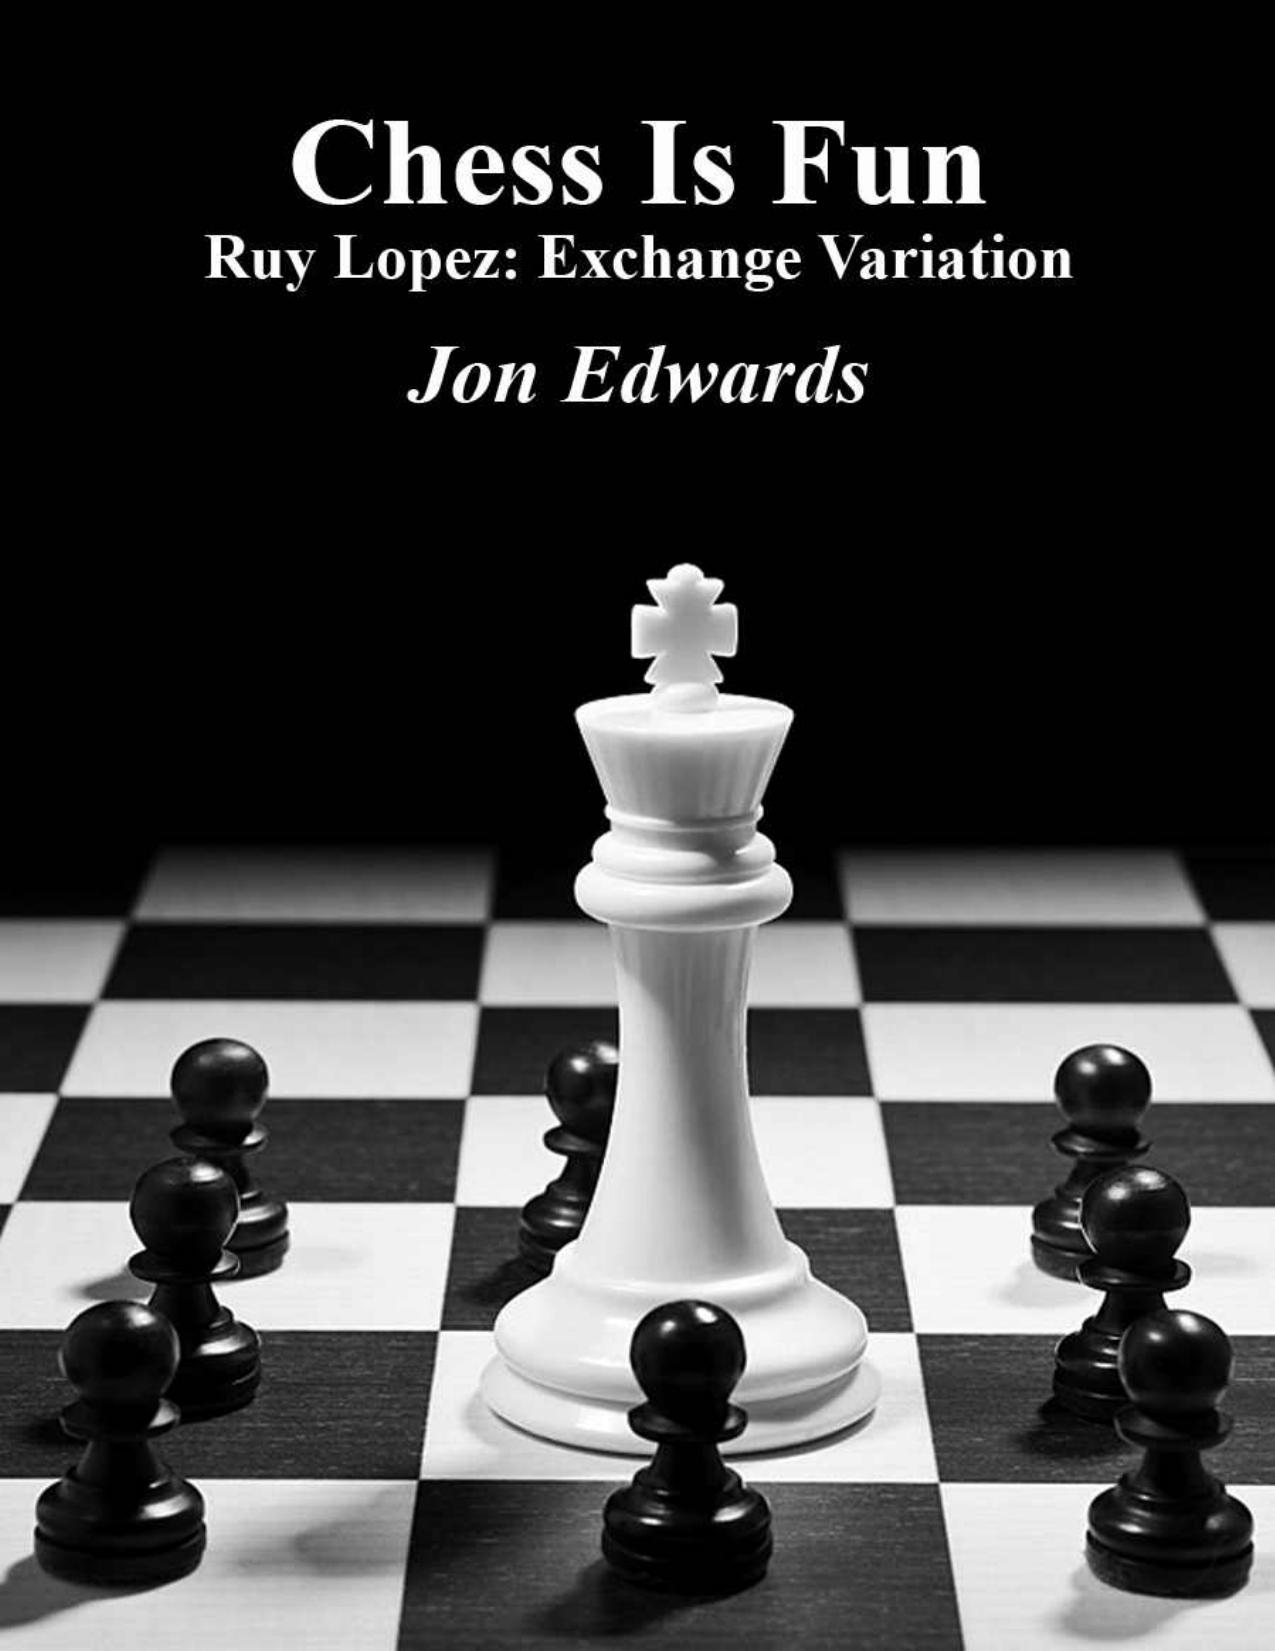 Ruy Lopez: Exchange Variation (Chess is Fun Book 27)